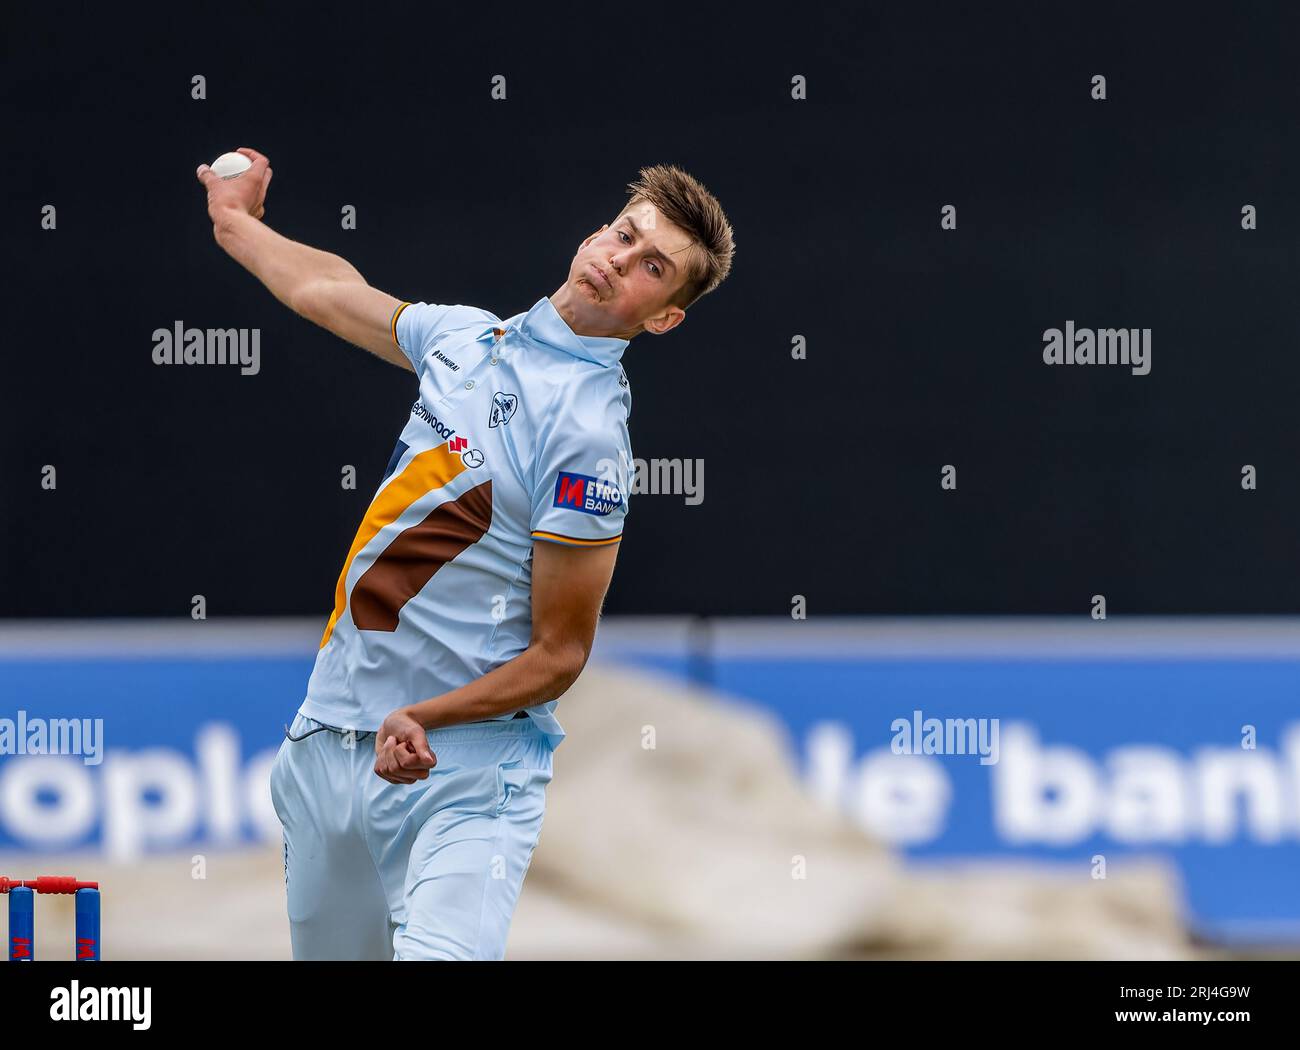 Harry Moore bowling for Derbyshire in a One Day Cup match against Worcestershire Rapids Stock Photo